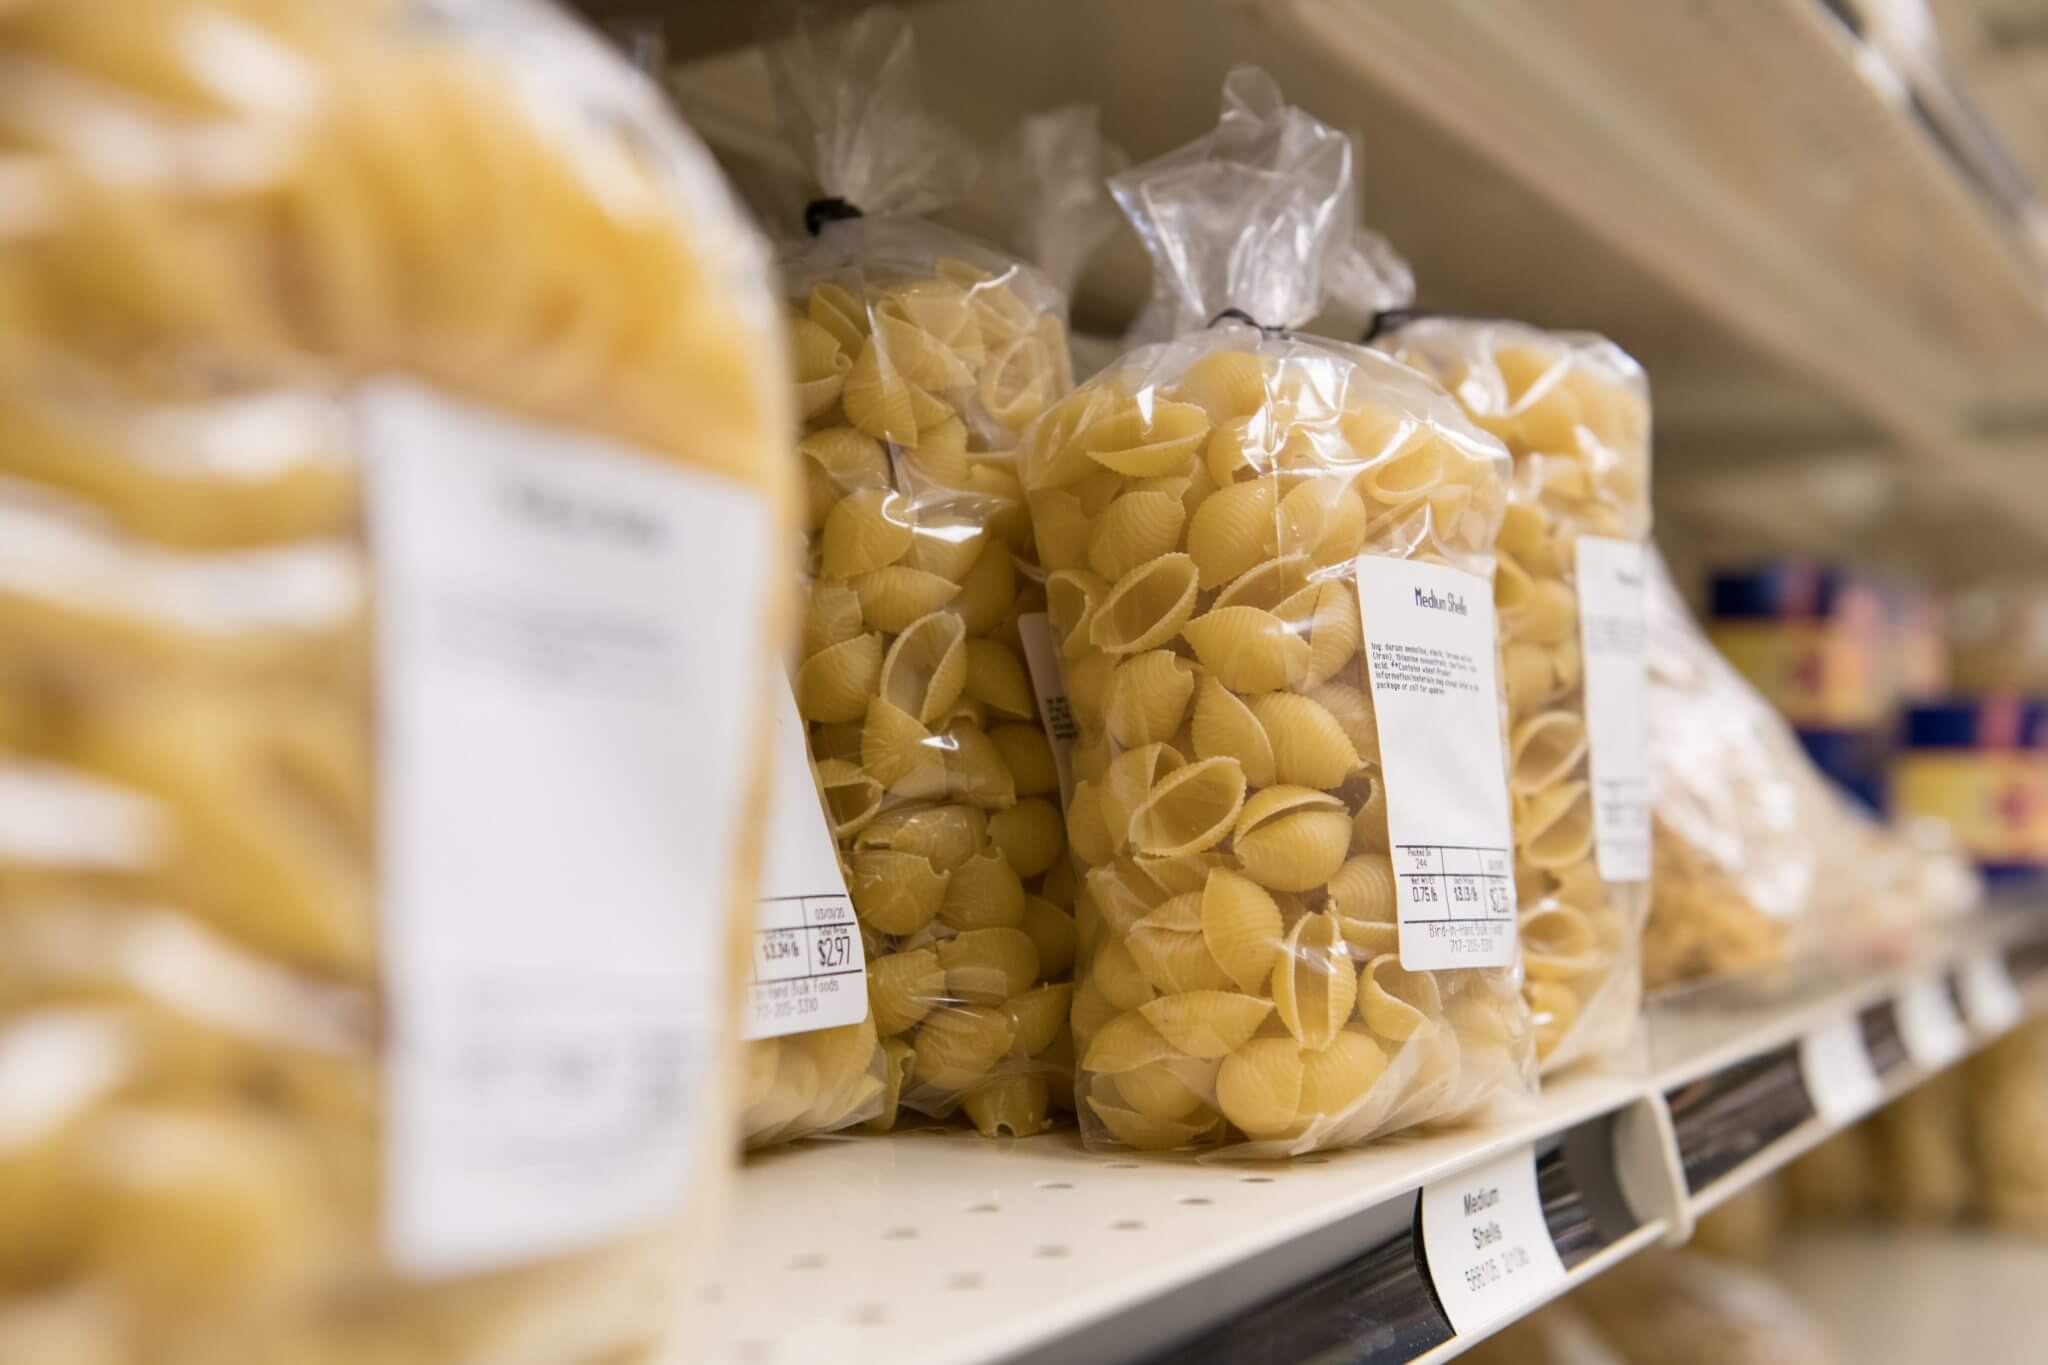 The Markets shelves are lined with a variety of freshly made, bulk pasta for sale in large bags.